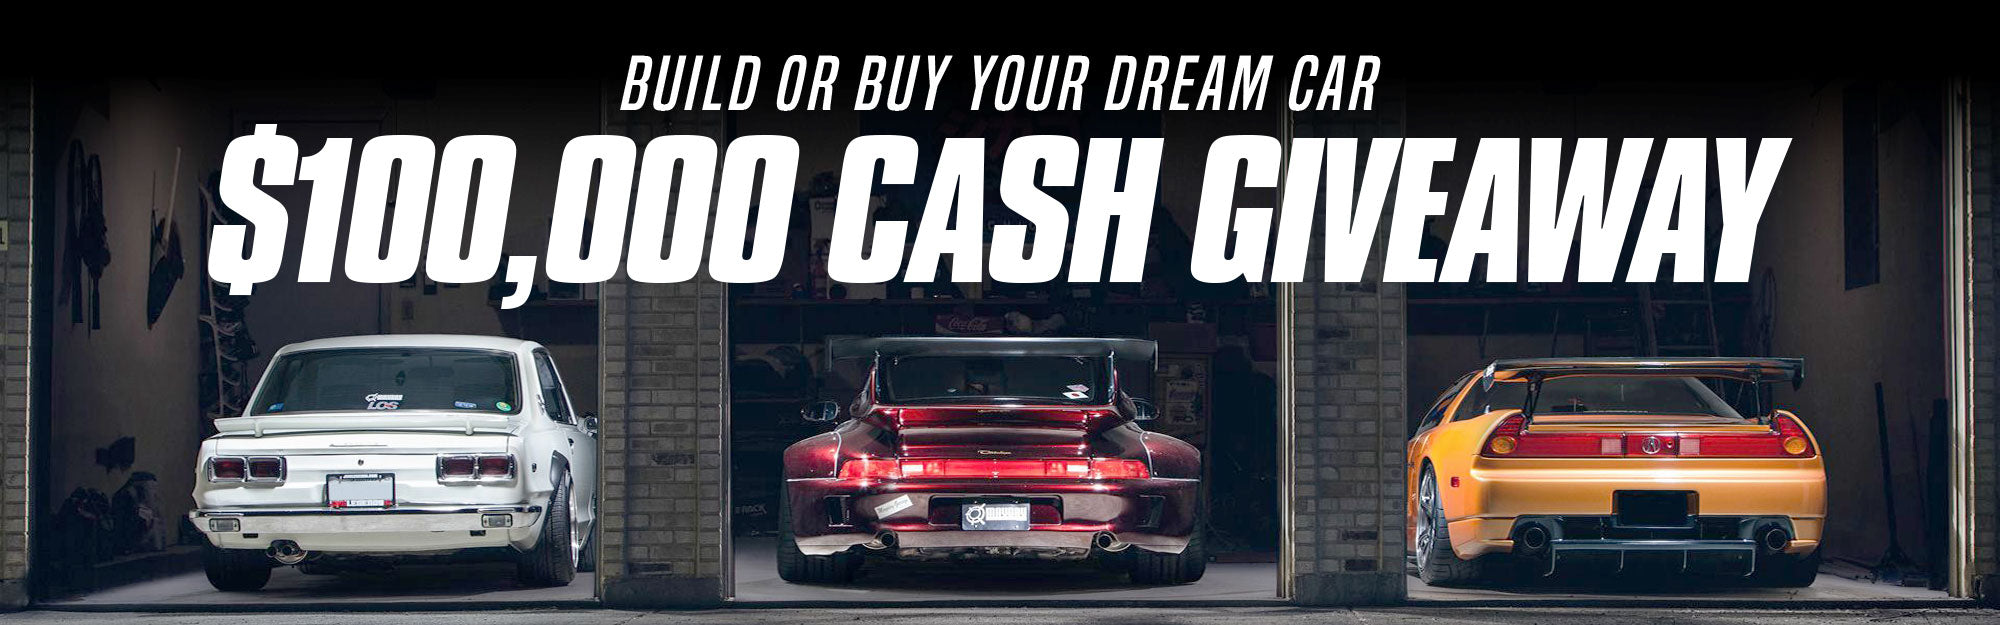 Win $100,000 cash to build or buy your dream car